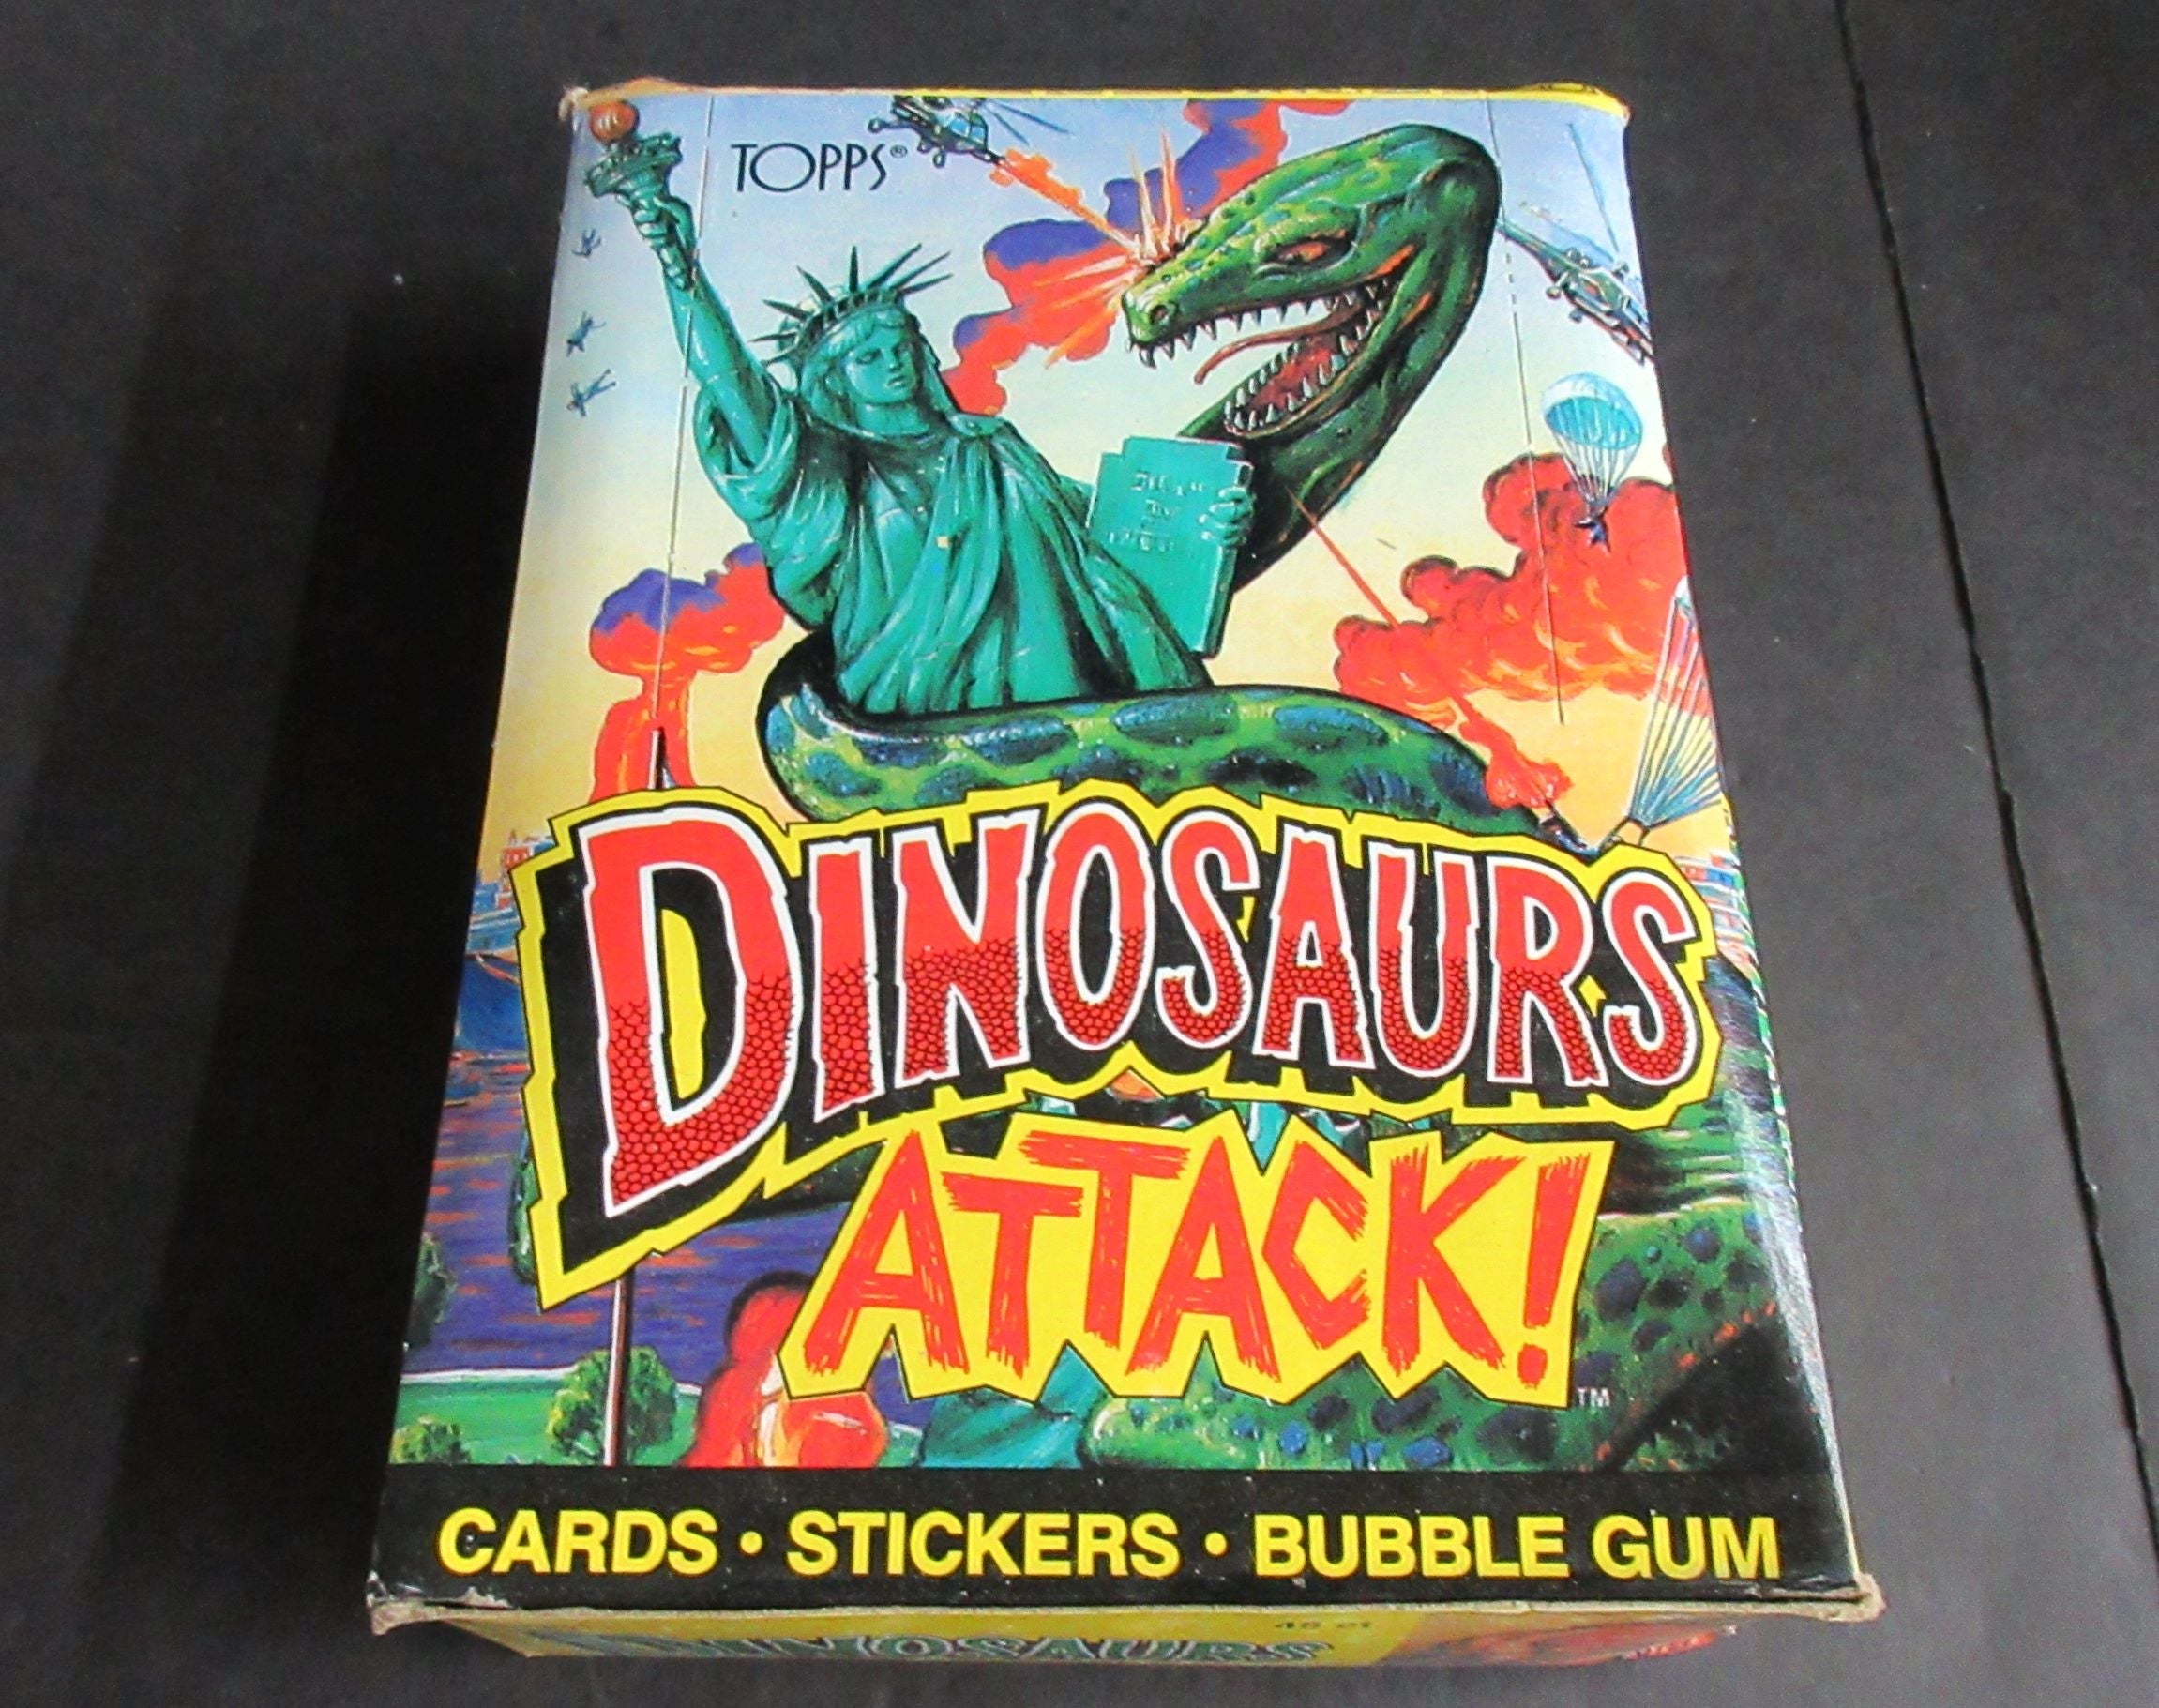 1988 Topps Dinosaurs Attack Unopened Wax Box (Authenticate)